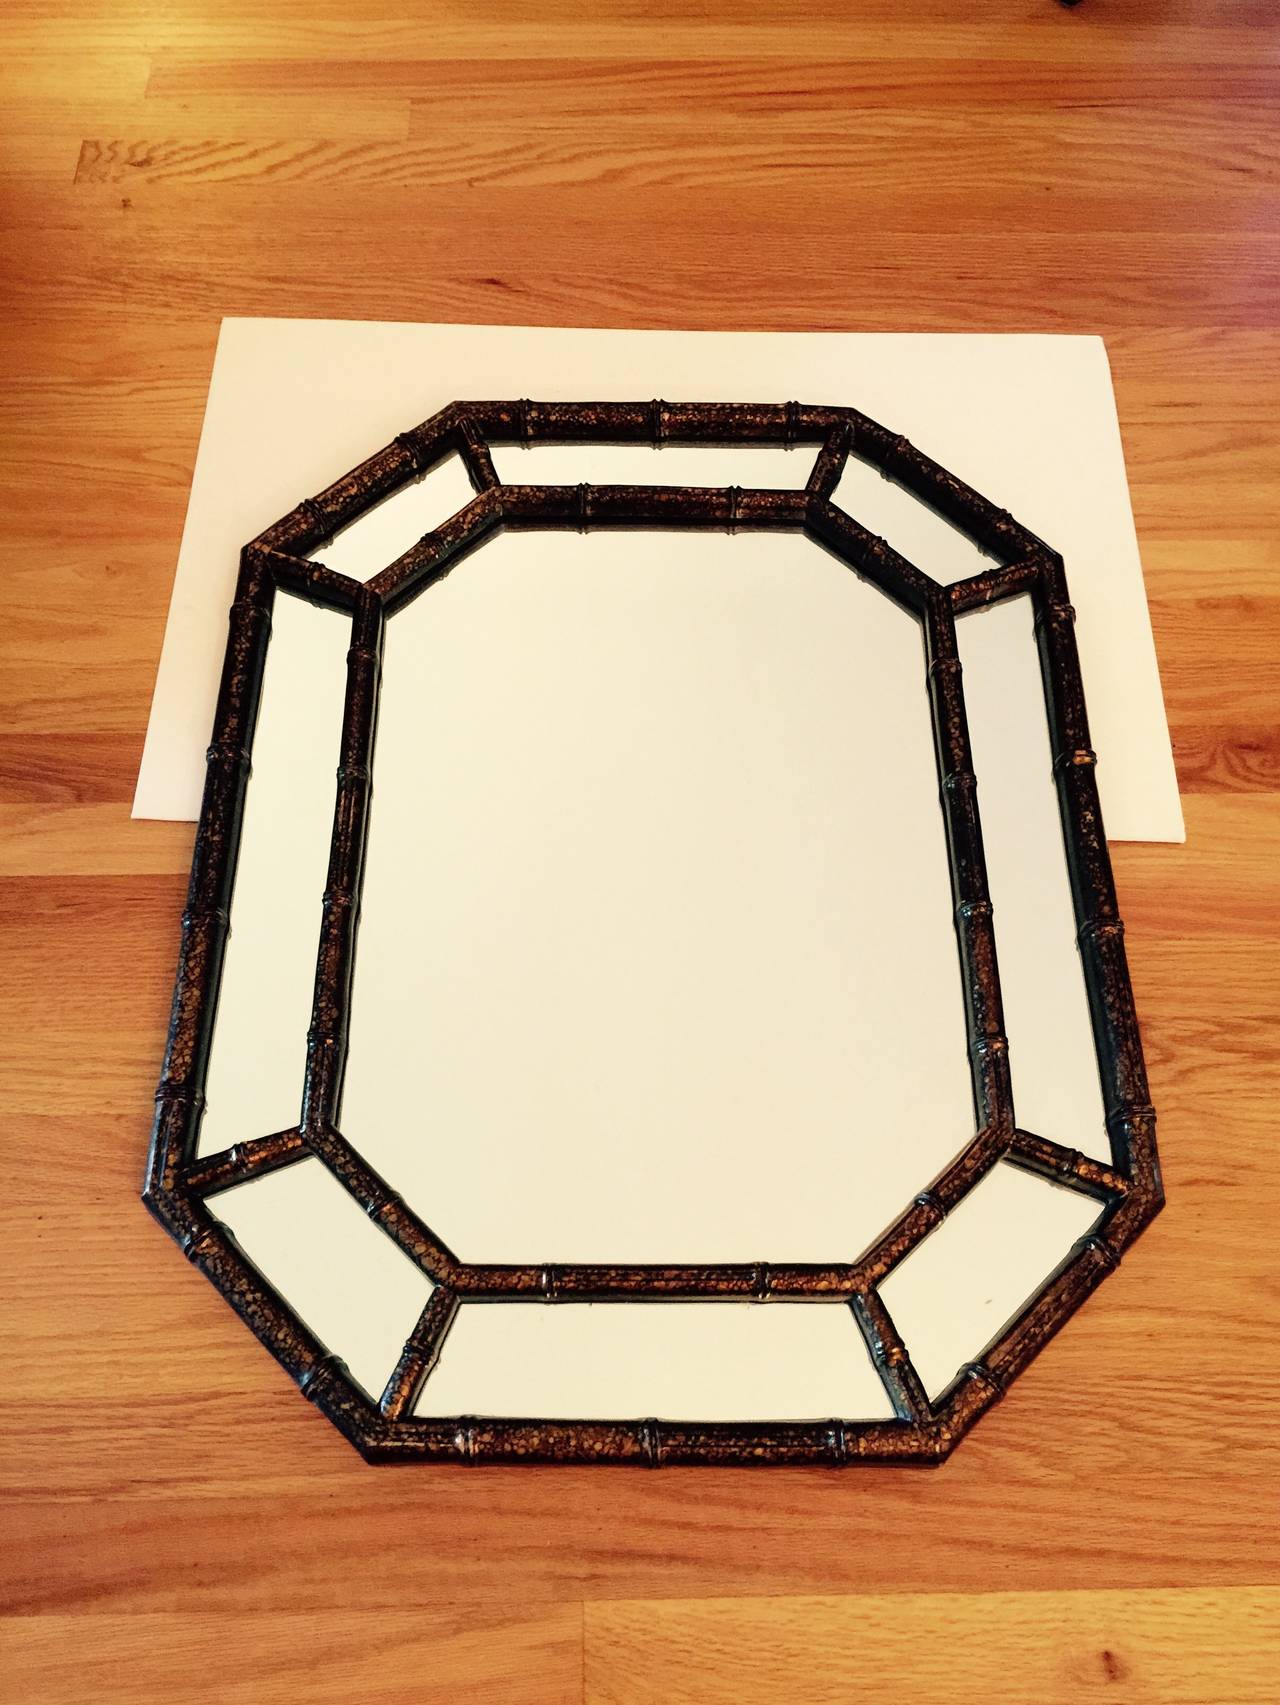 Faux tortoiseshell oil drop wall mirror. Octagonal wood frame. Hangers on back allow hanging vertically (as shown in photos) or horizontally. Minimal age wear. No maker's mark.